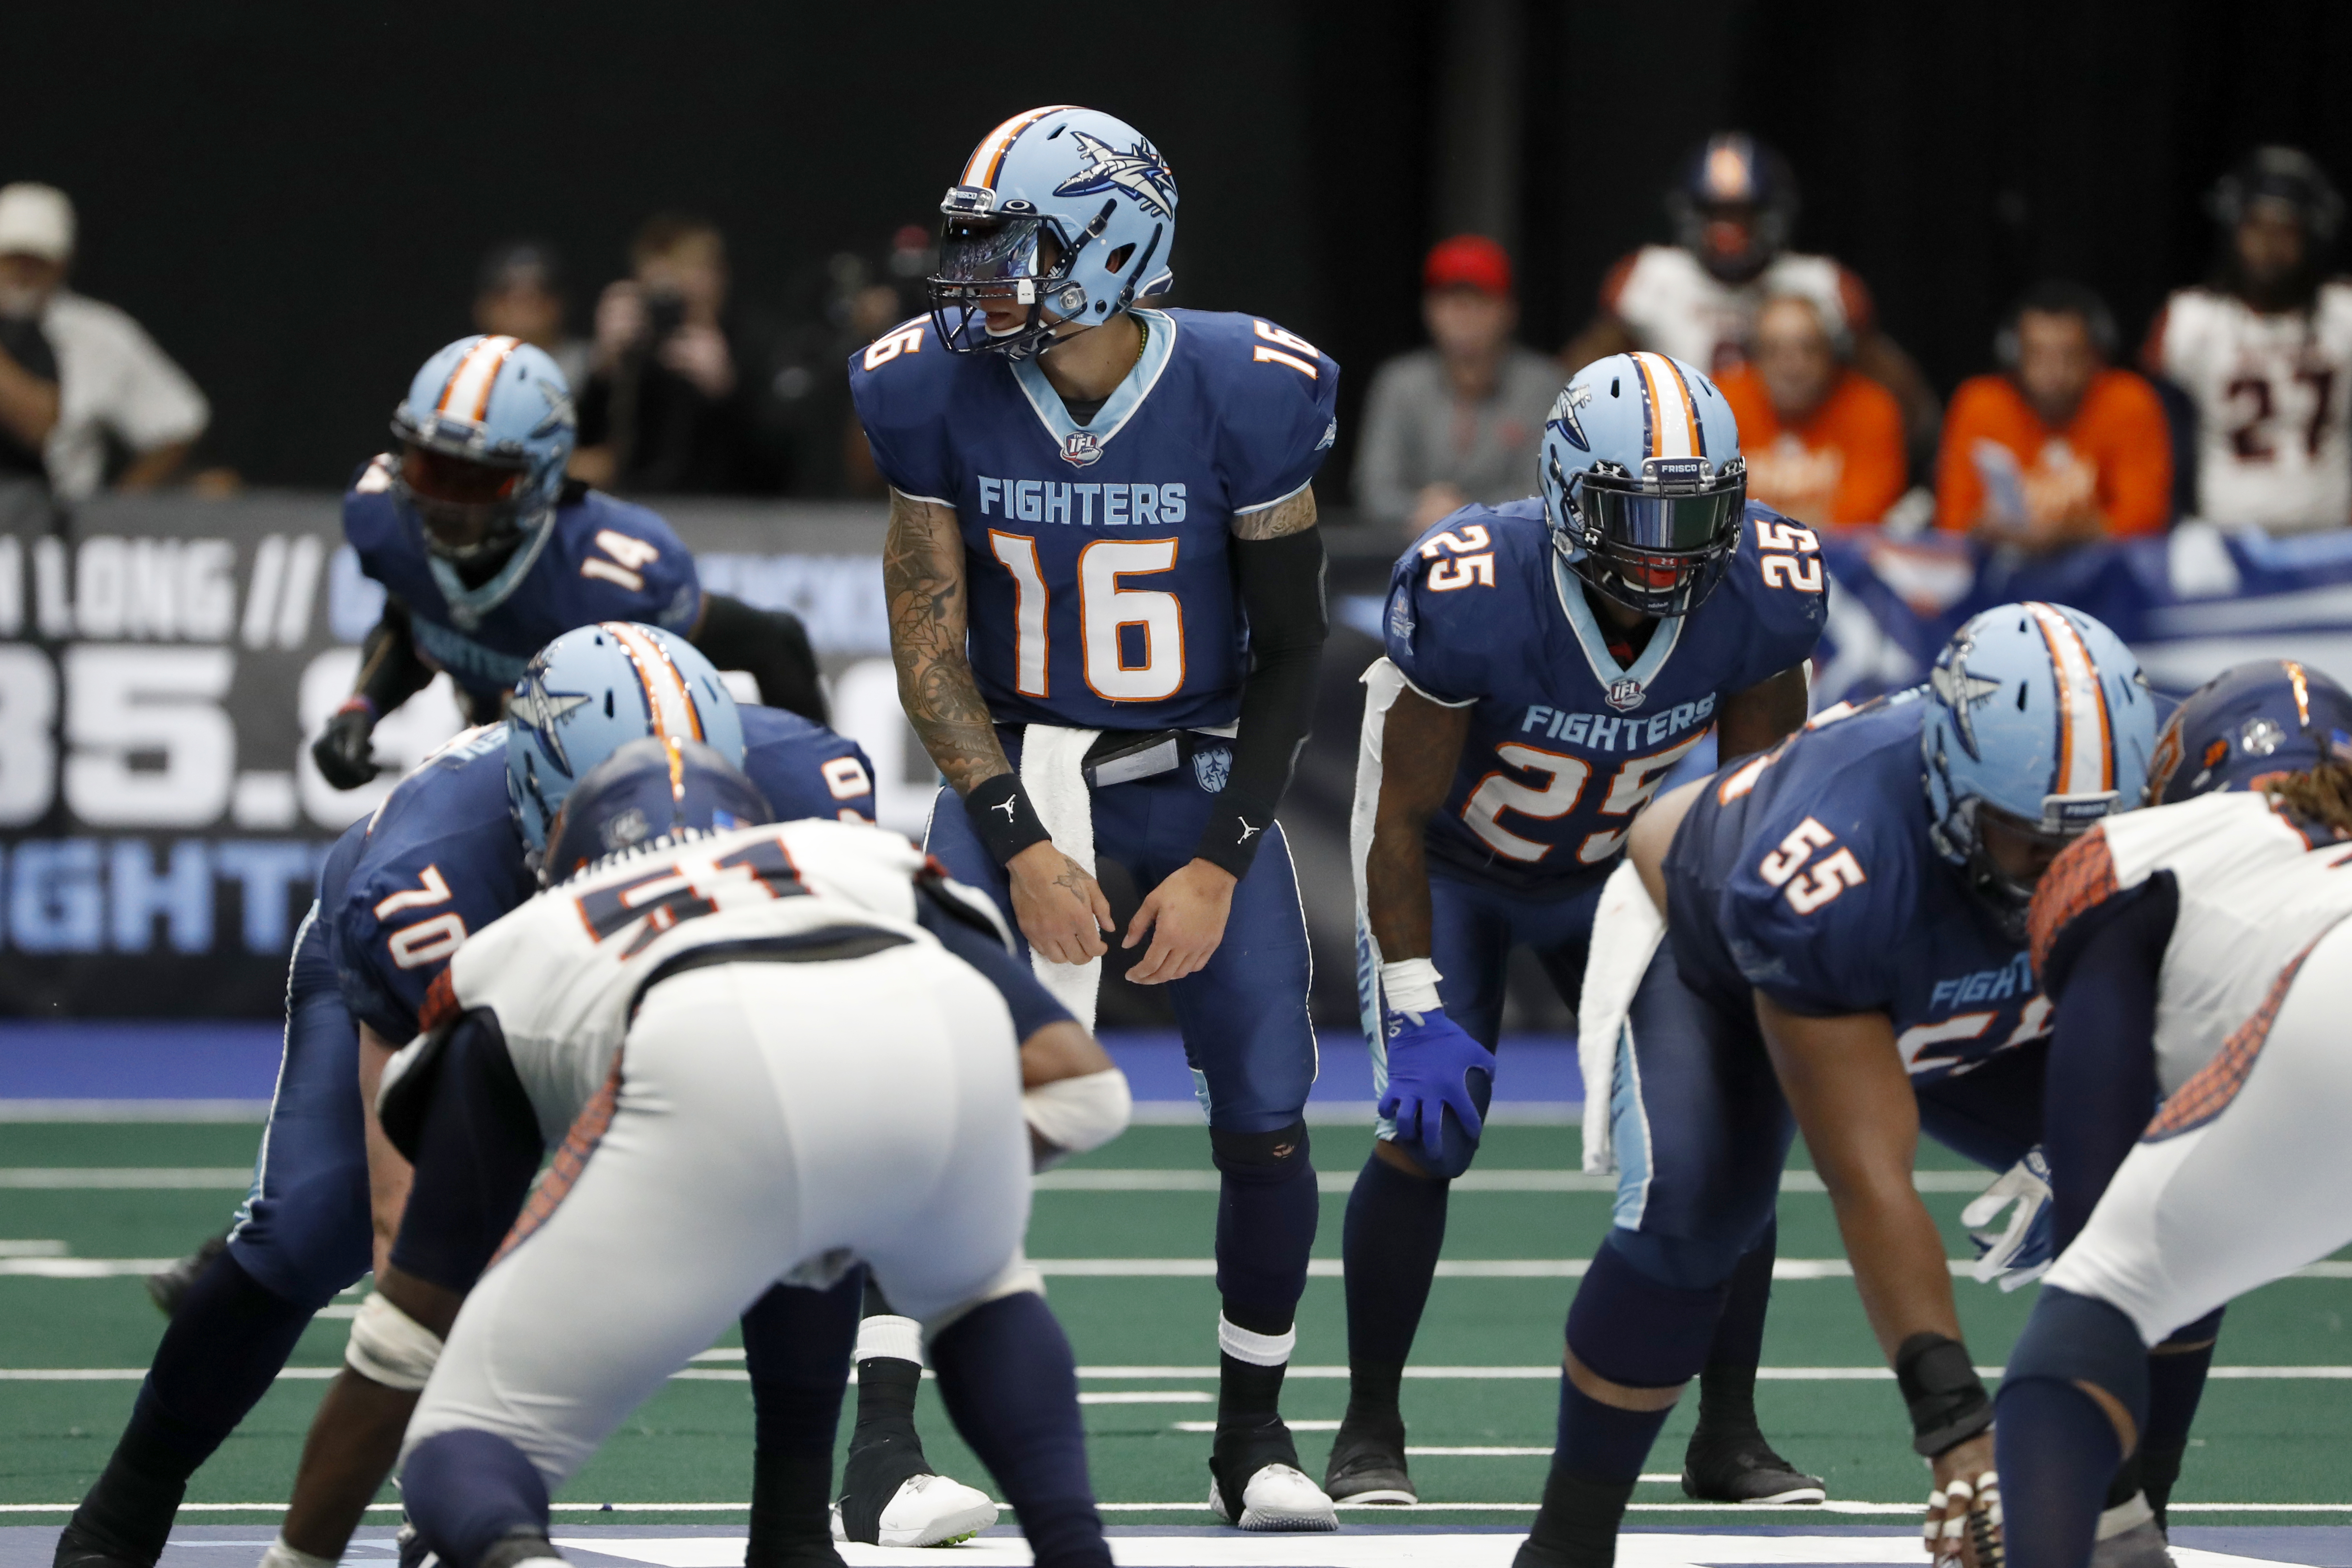 Frisco Fighters' named Indoor Football League team for the city